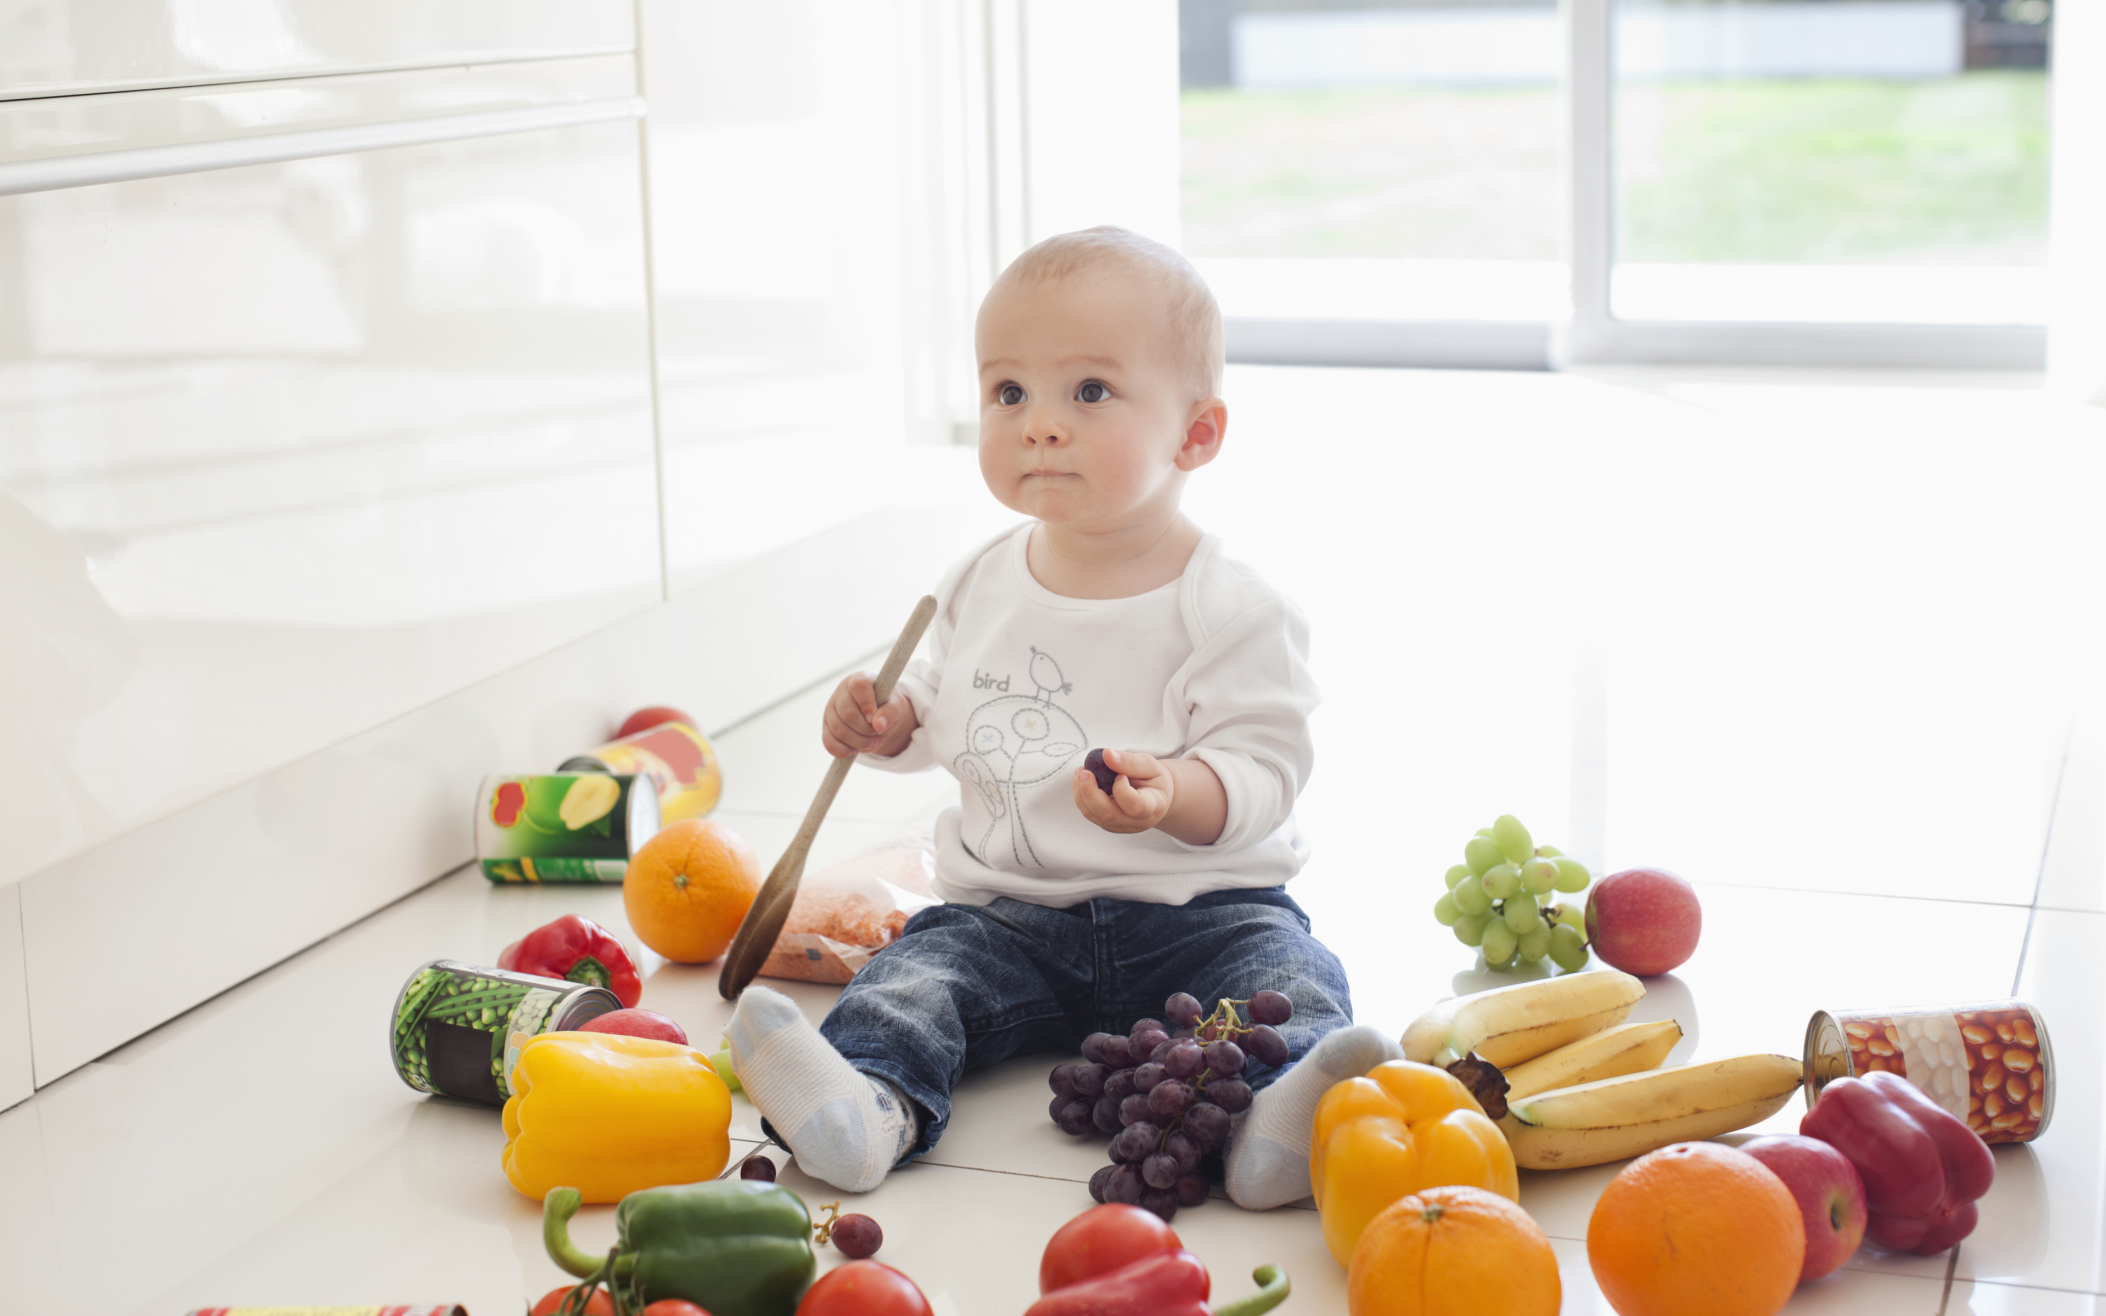 Solids to sandwiches: How to encourage healthy eating habits in kids